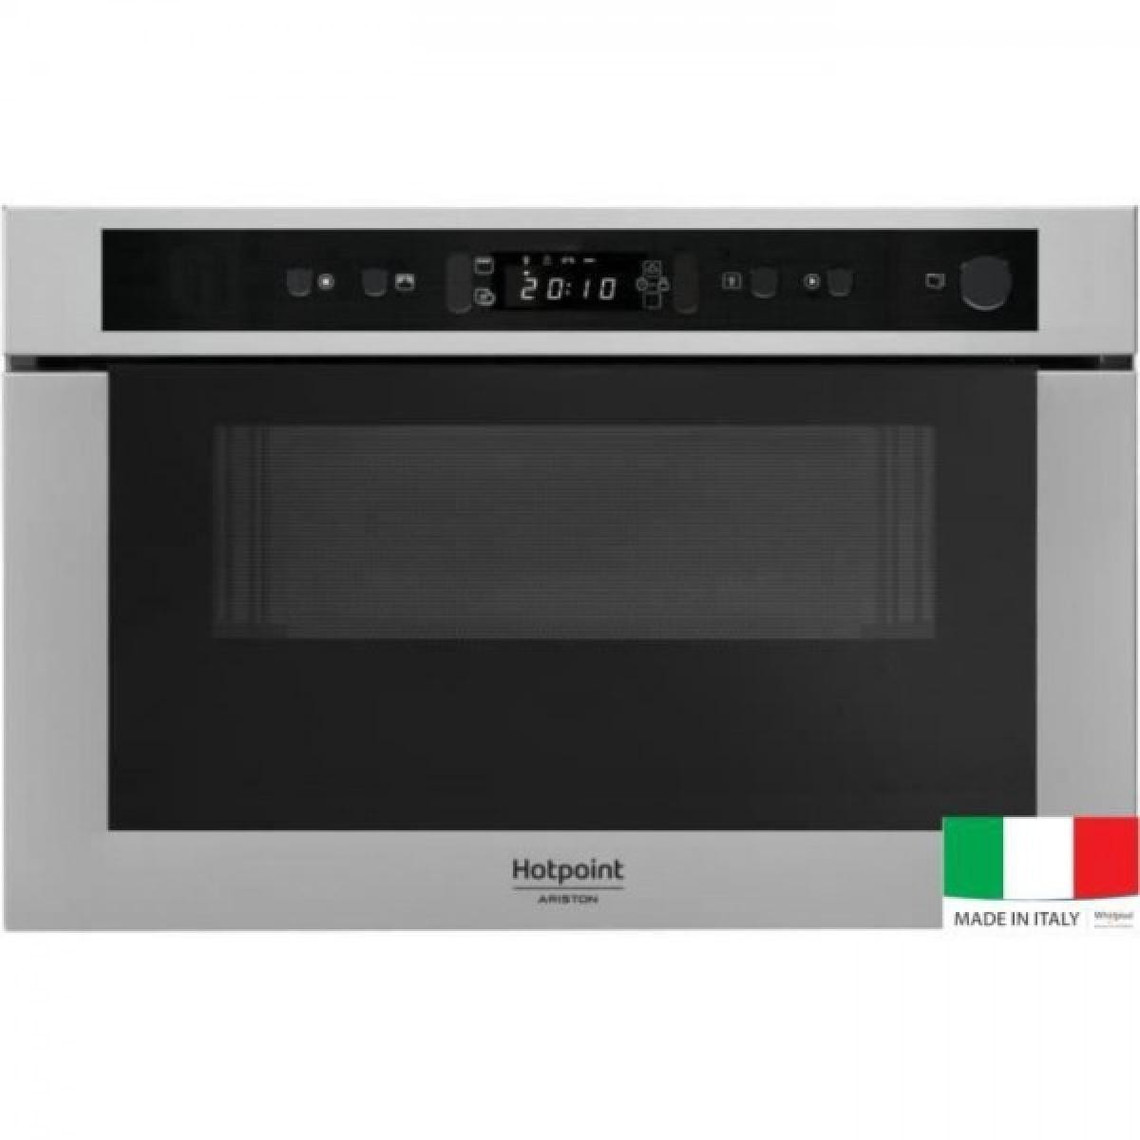 Hotpoint HOTPOINT MH 400 IX - Micro-ondes combiné encastrable inox anti-trace - 22L - 750 W - Grill 700 W